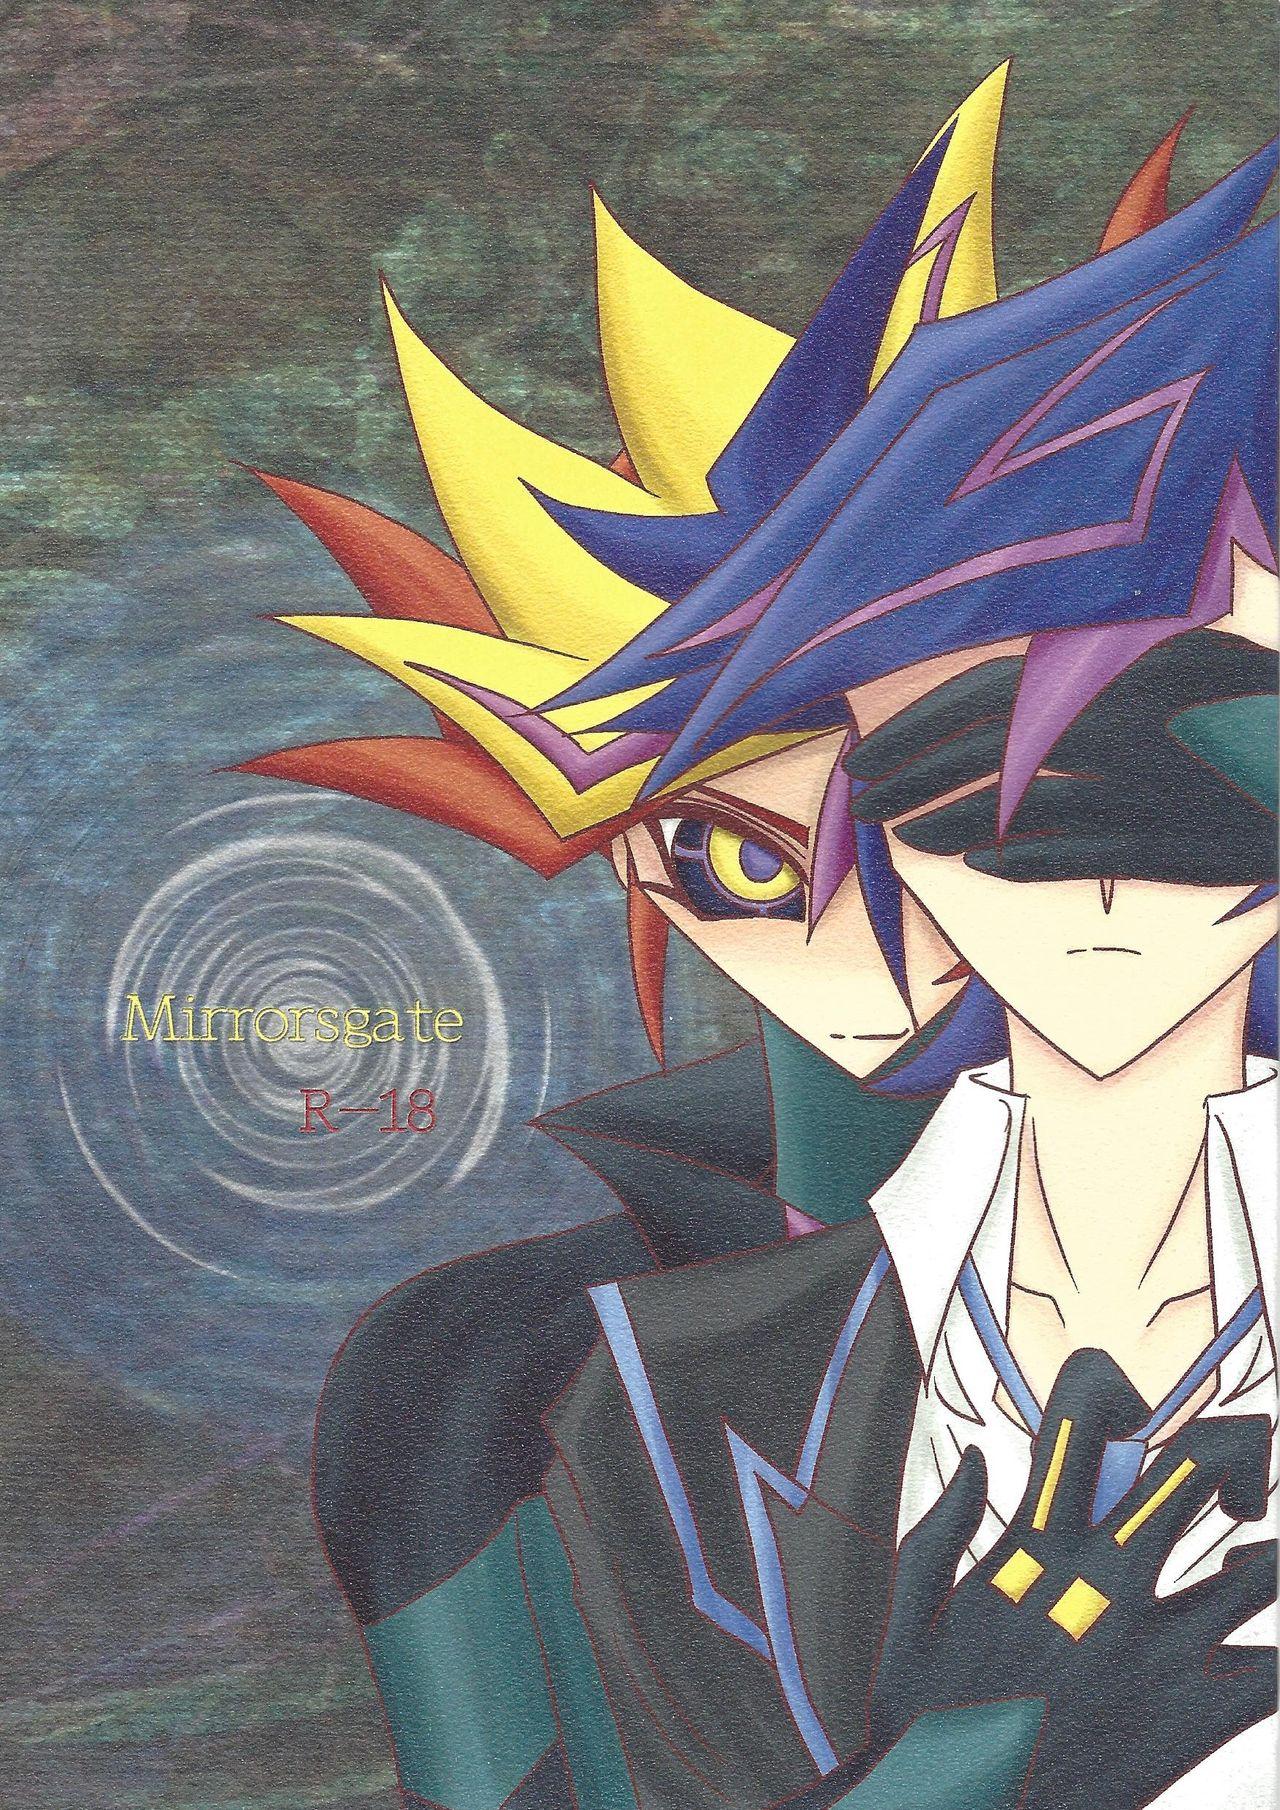 Adorable Mirrors gate - Yu gi oh vrains Machine - Picture 1